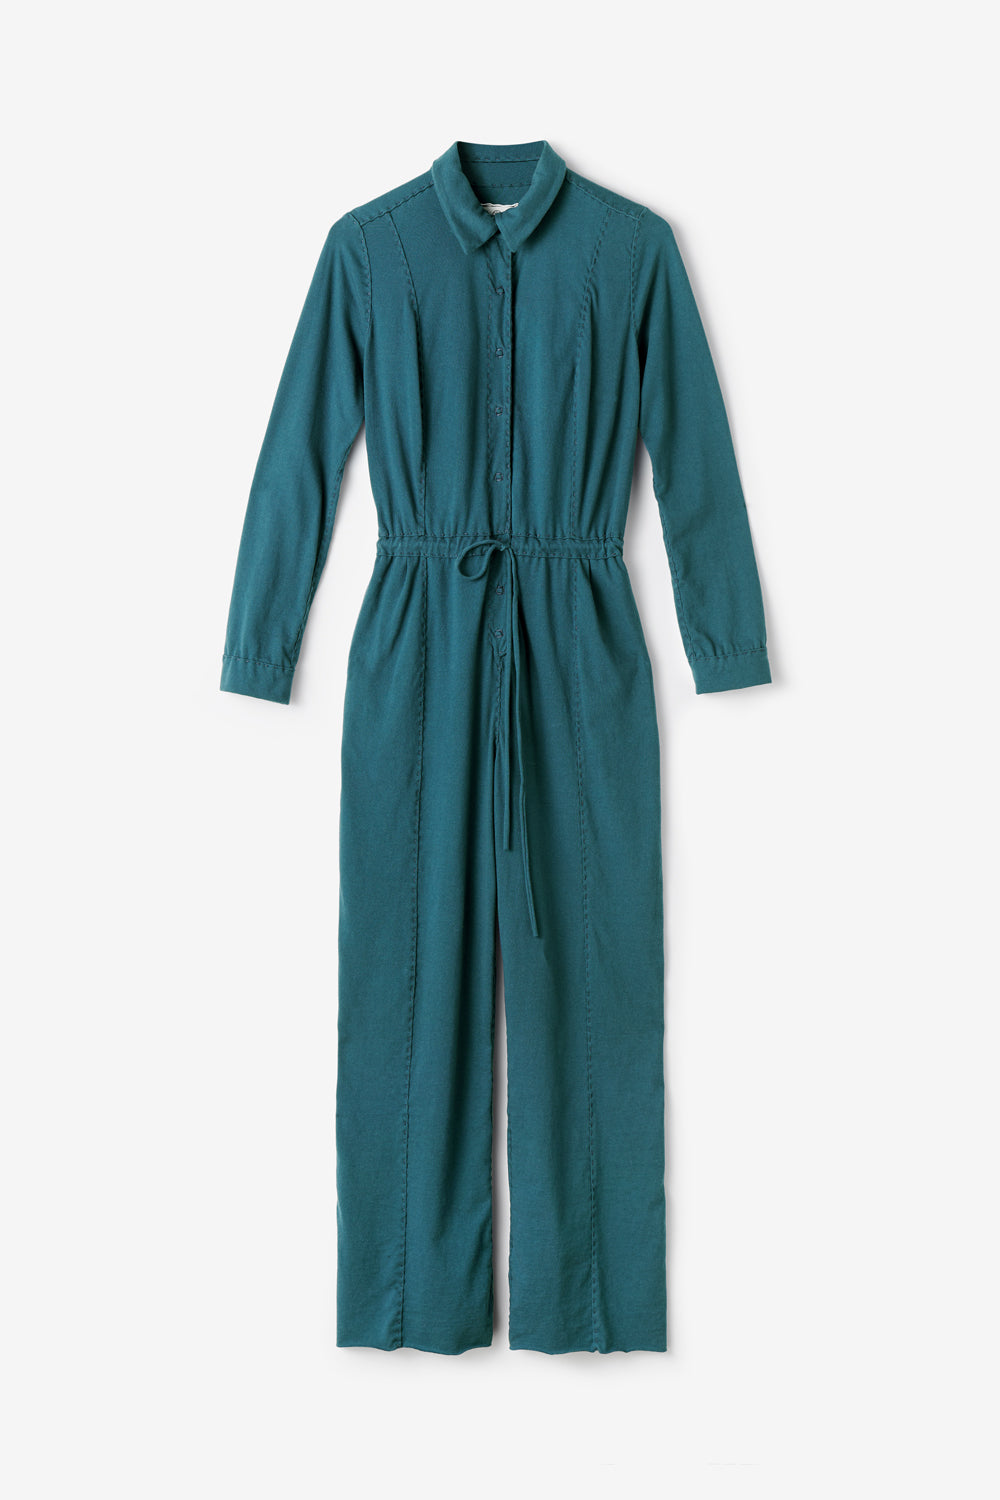 The School of Making Jumpsuit Kit in peacock blue. Made with 100% organic cotton.